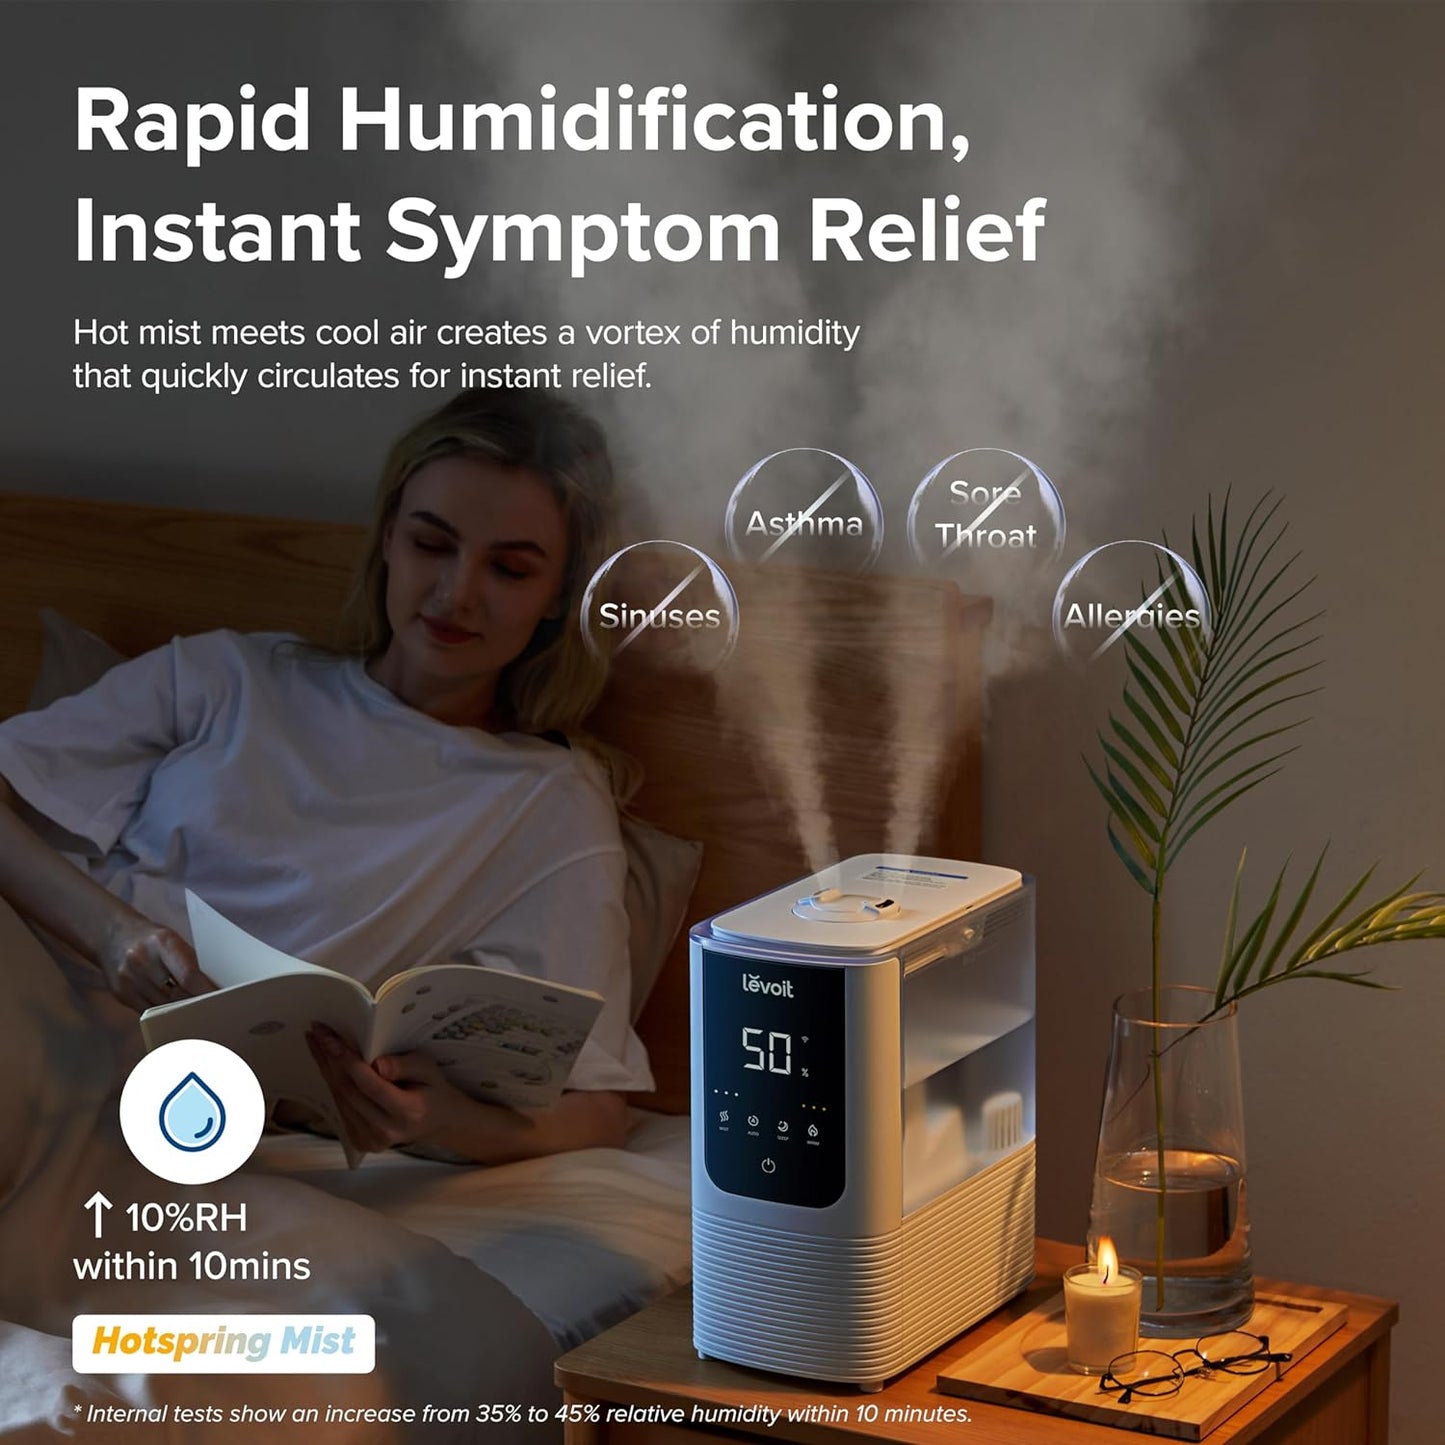 LEVOIT Humidifiers for Bedroom Home, Smart Warm and Cool Mist Air Humidifier for Large Room, Auto Customized Humidity, Fast Symptom Relief, Easy Top Fill, Essential Oil, Quiet, OasisMist4.5L, White